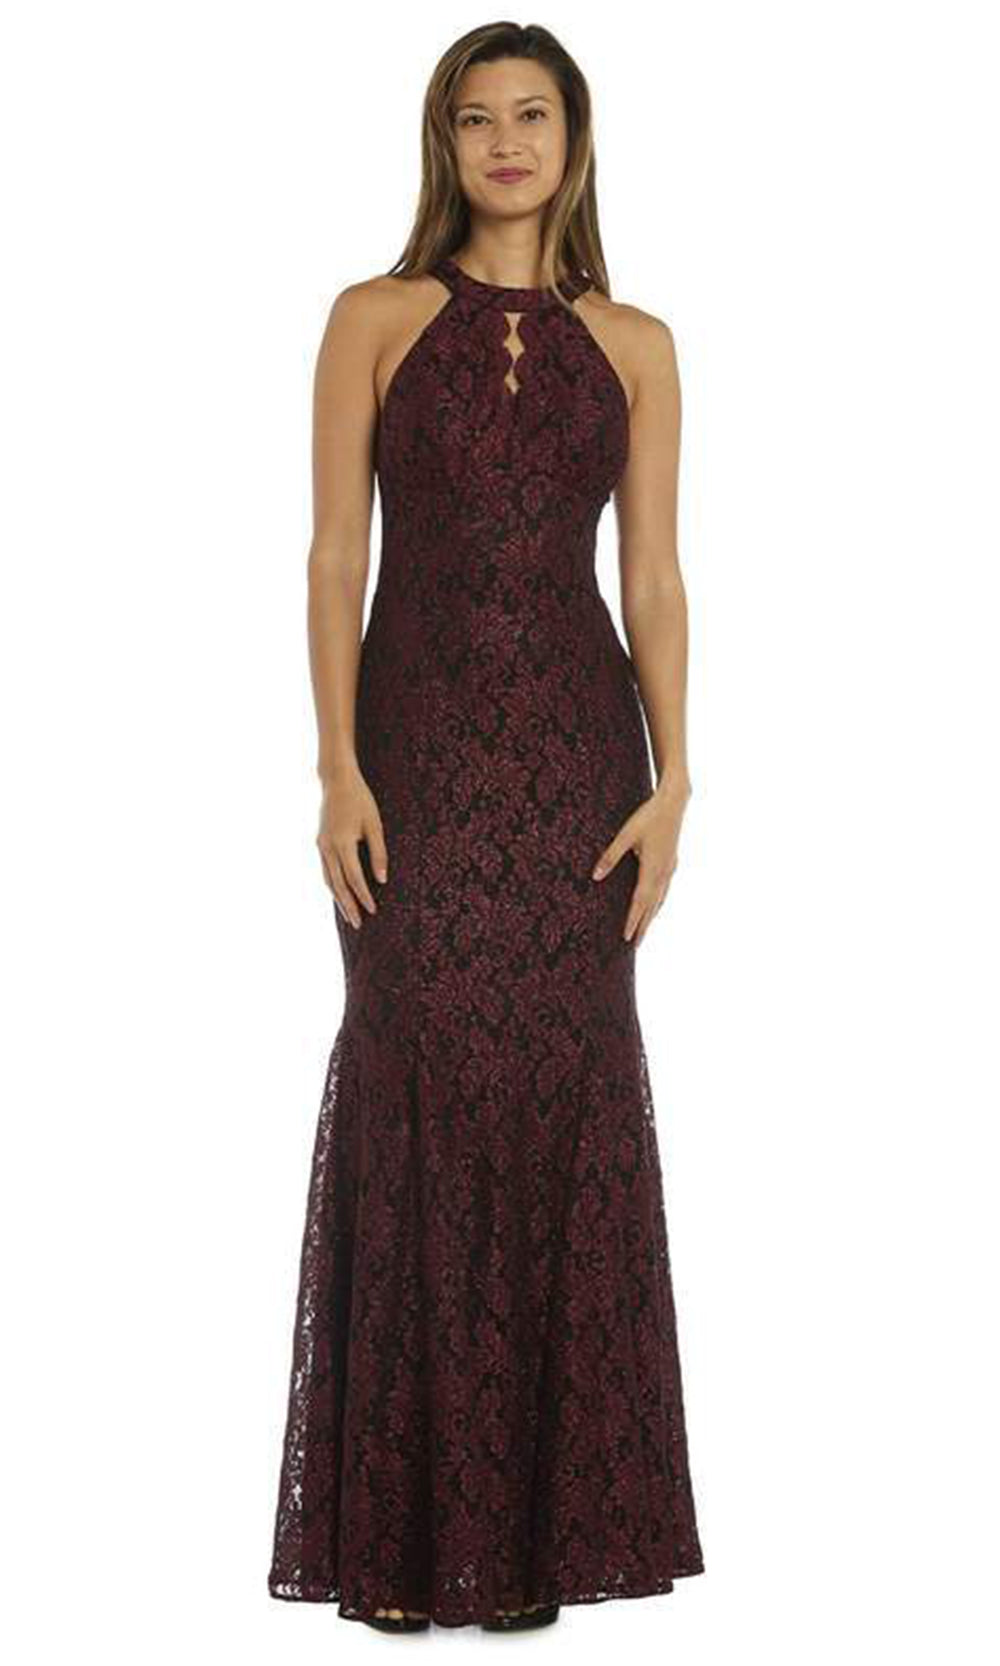 Nightway - 21689SC Halter Neck Lace Glittered Dress In Red and Black